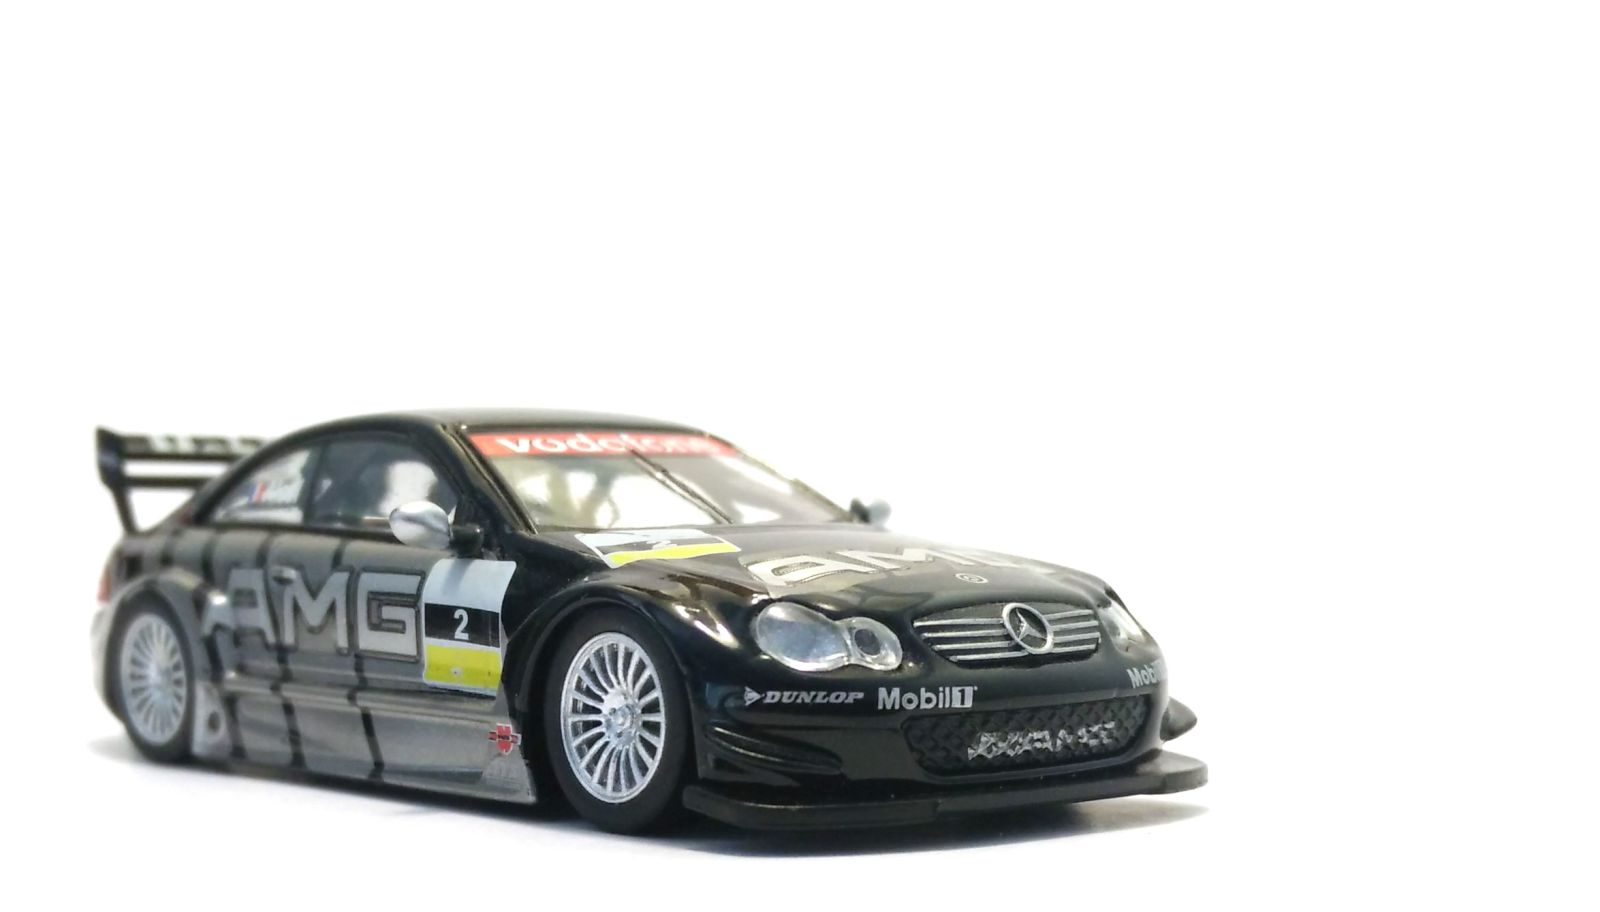 Illustration for article titled Teutonic Tuesday: Mercedes-Benz AMG CLK DTM